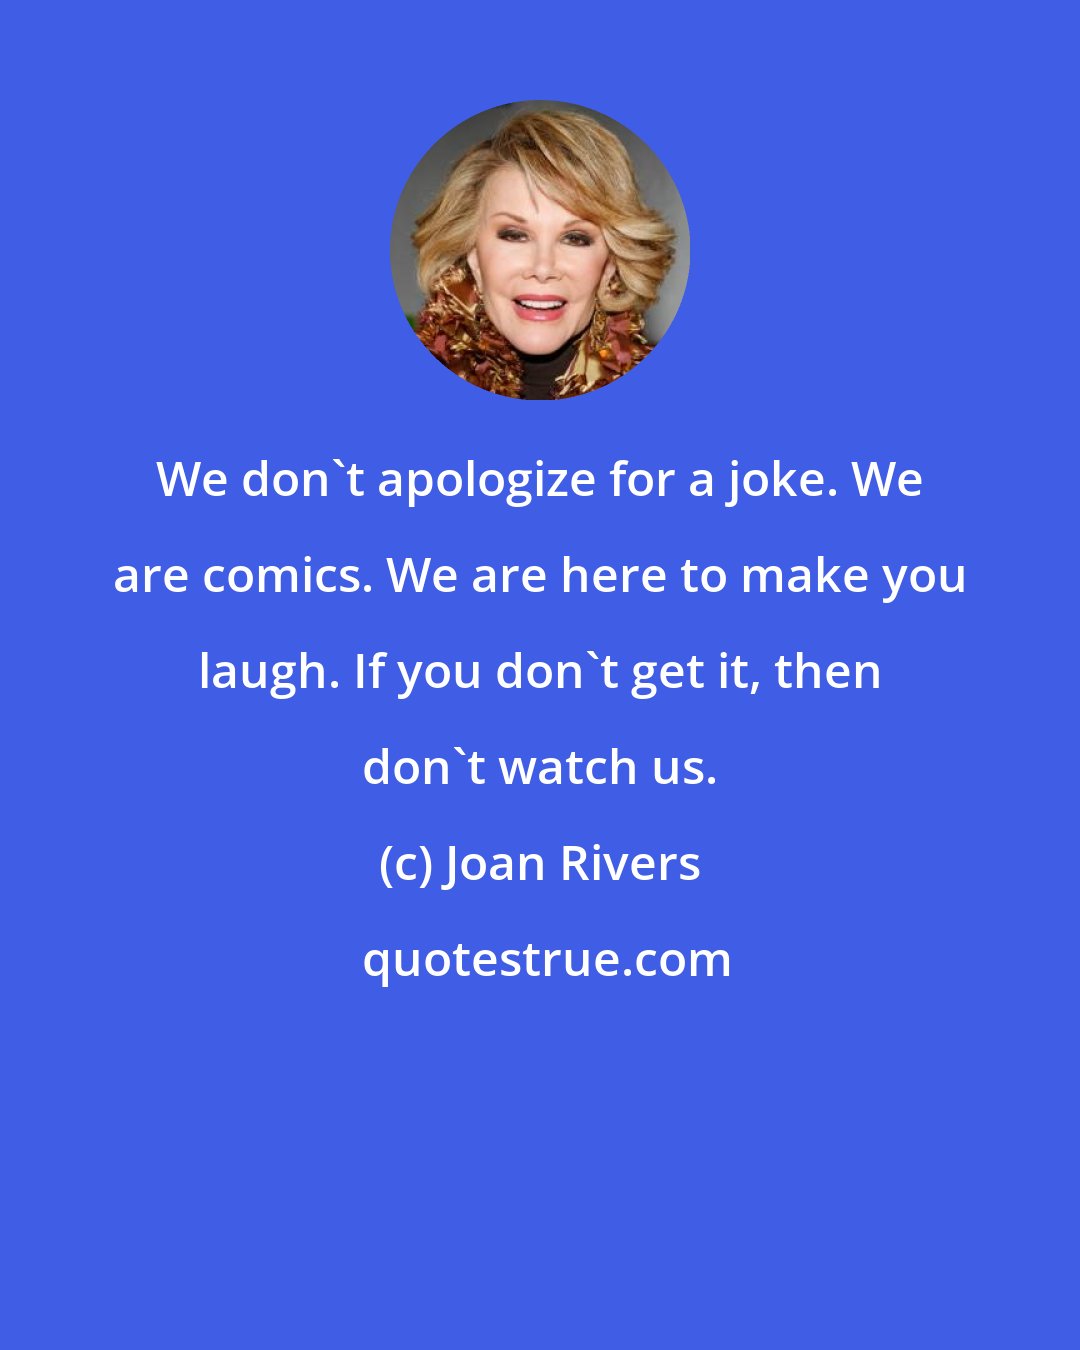 Joan Rivers: We don't apologize for a joke. We are comics. We are here to make you laugh. If you don't get it, then don't watch us.